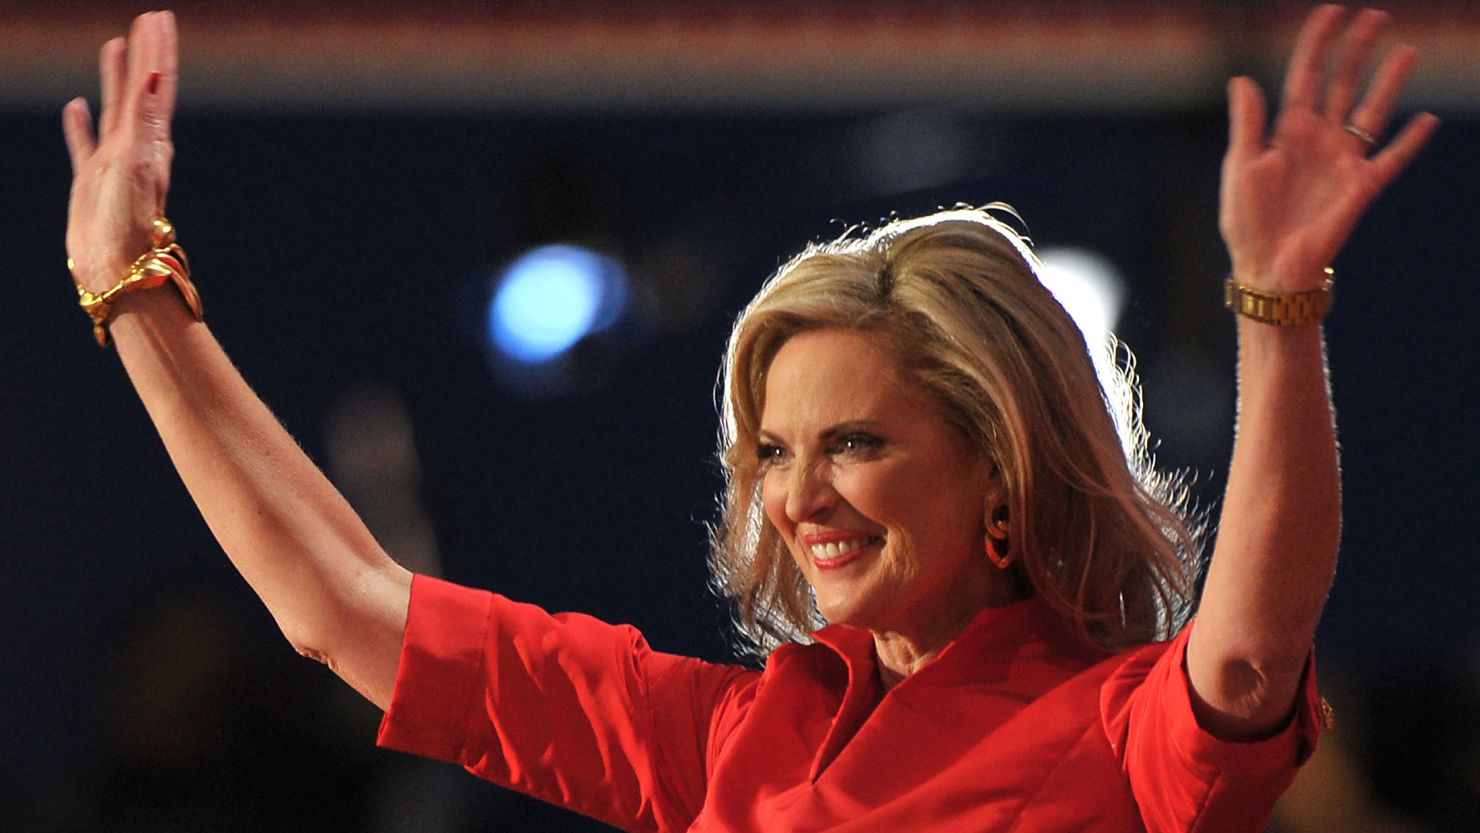 Ann Romney's speech drew cheers from the audience at the Republican National Convention.